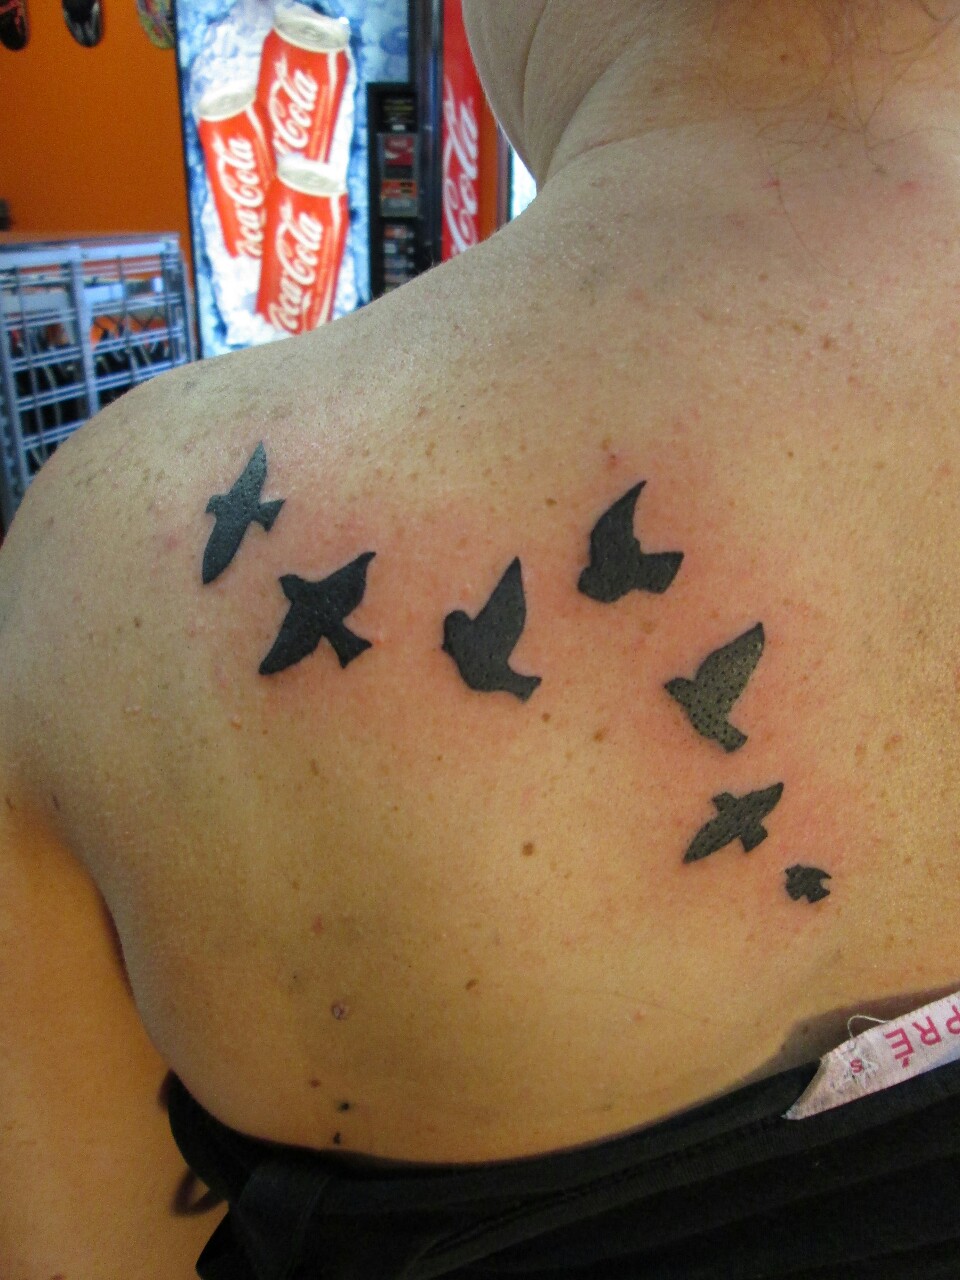 Small Bird Tattoos Designs, Ideas and Meaning | Tattoos For You